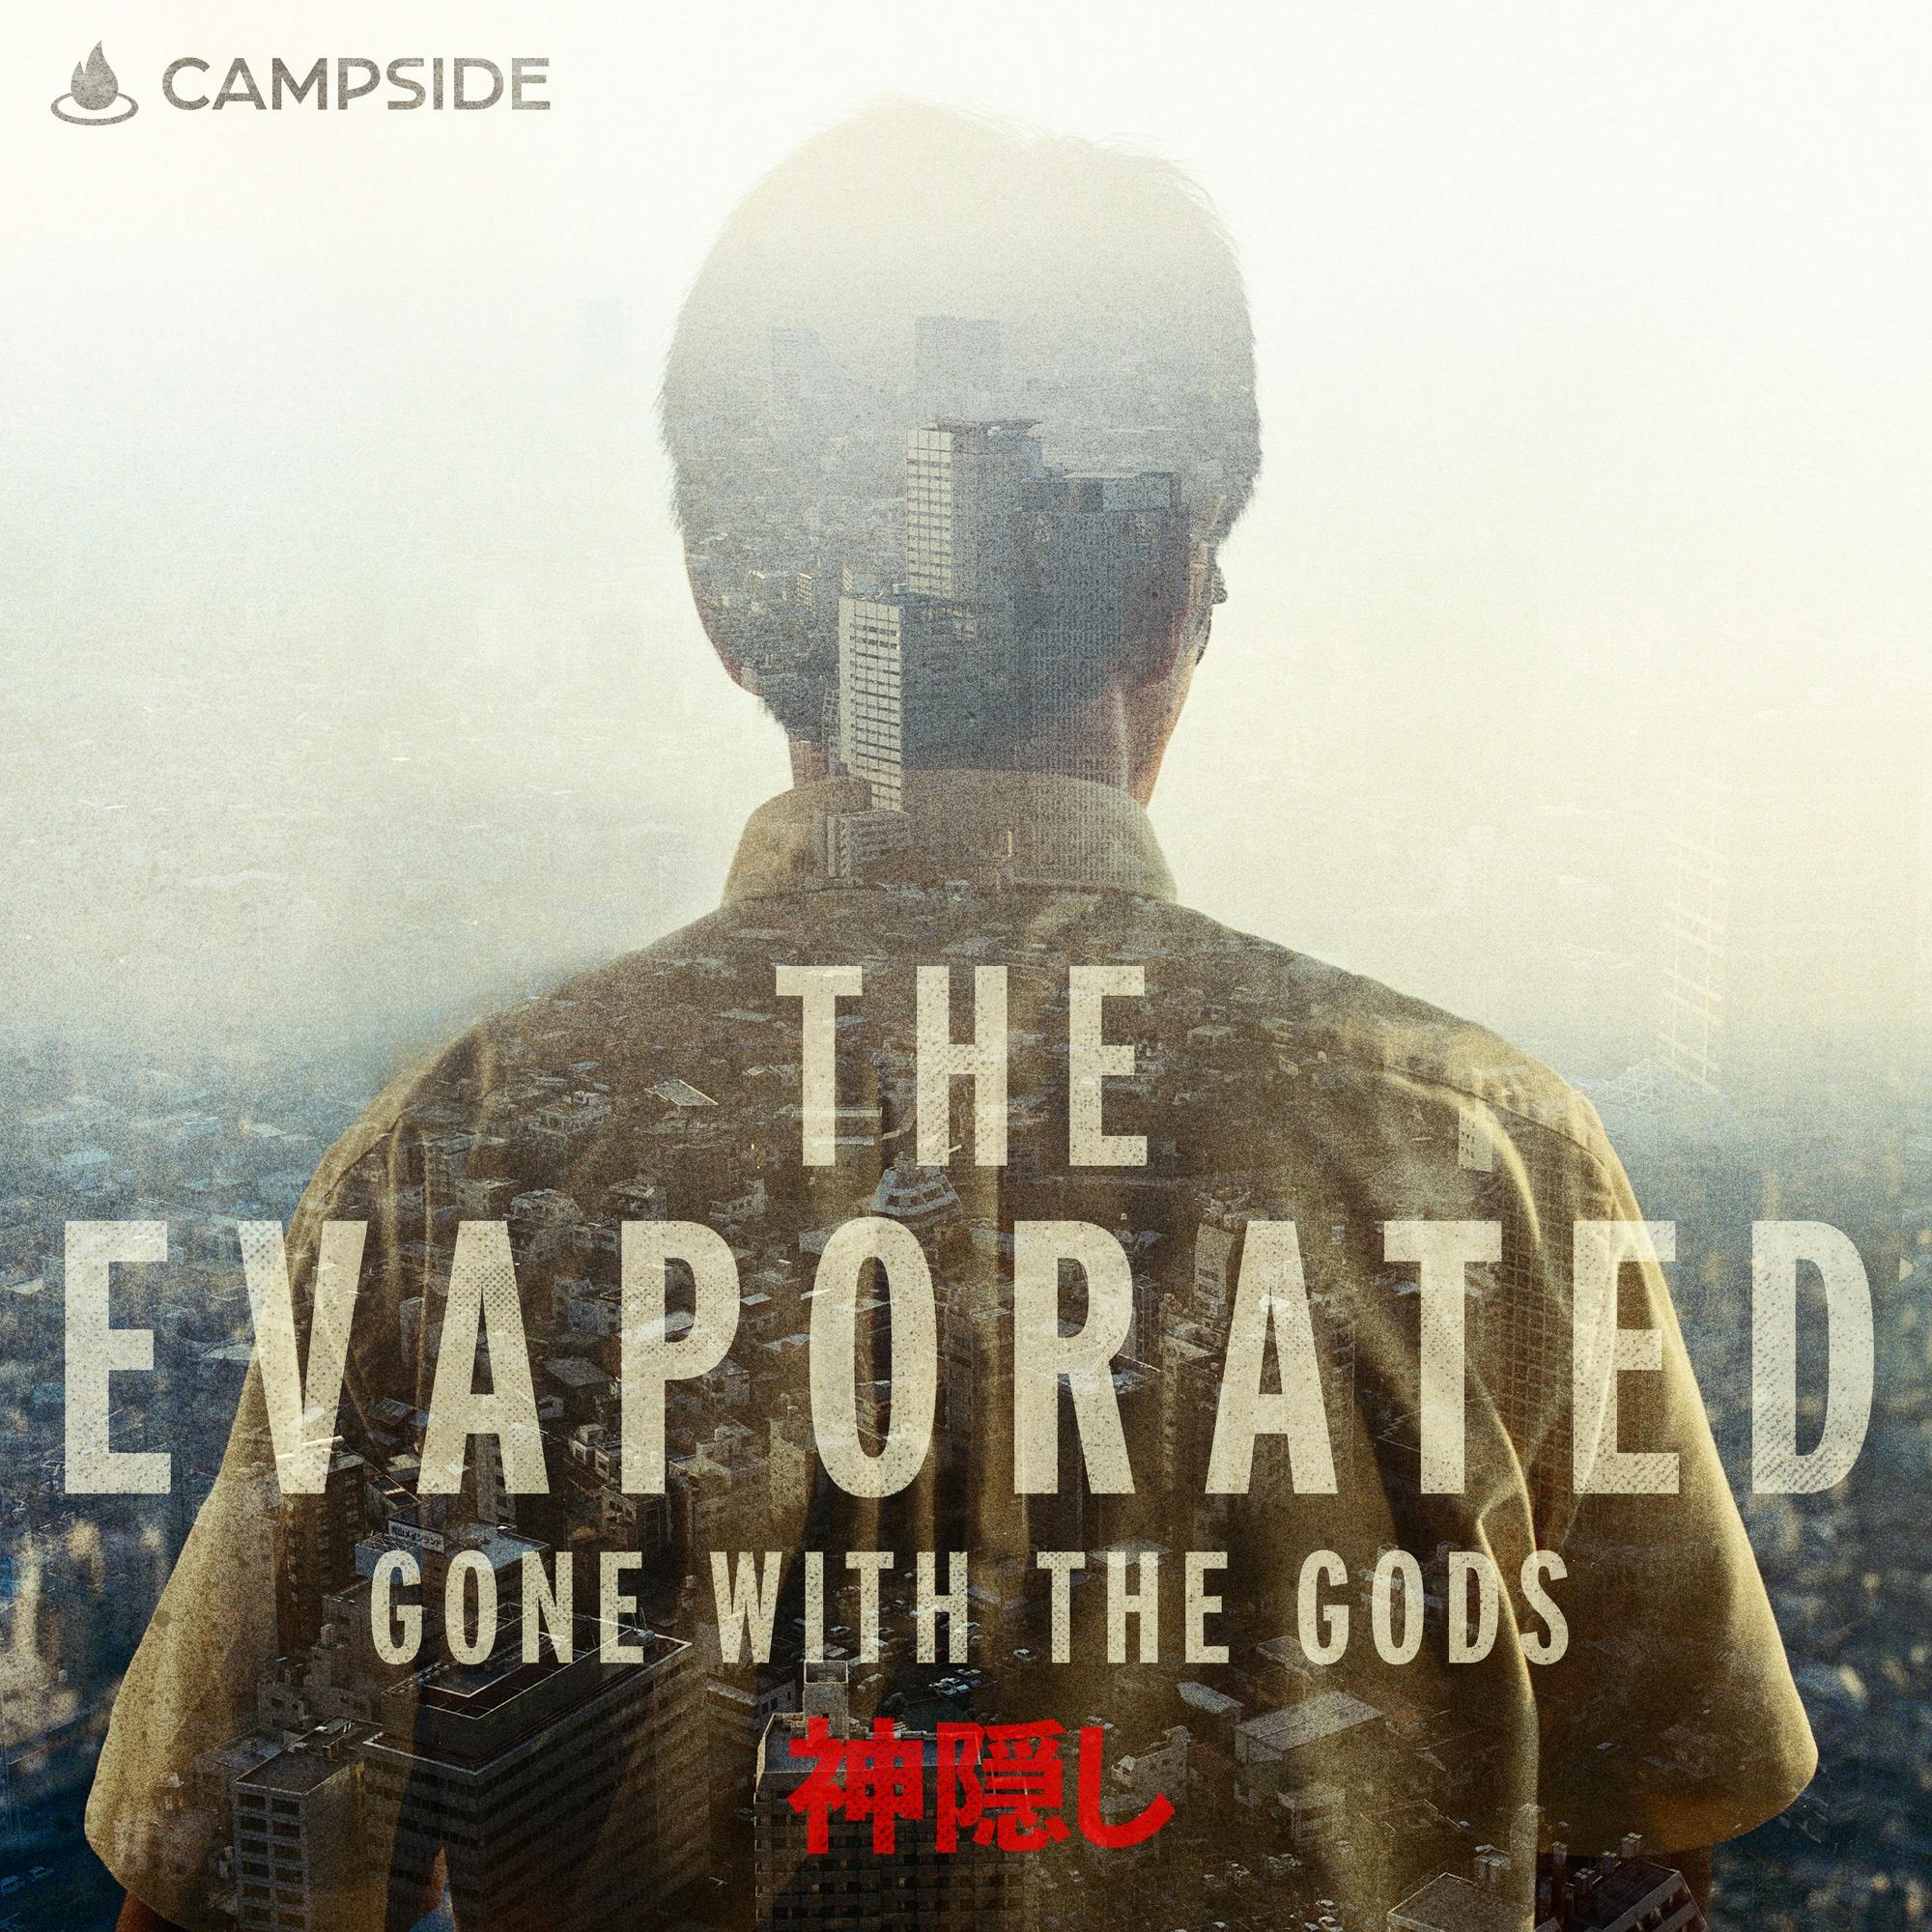 The Evaporated: Gone with the Gods podcast show image